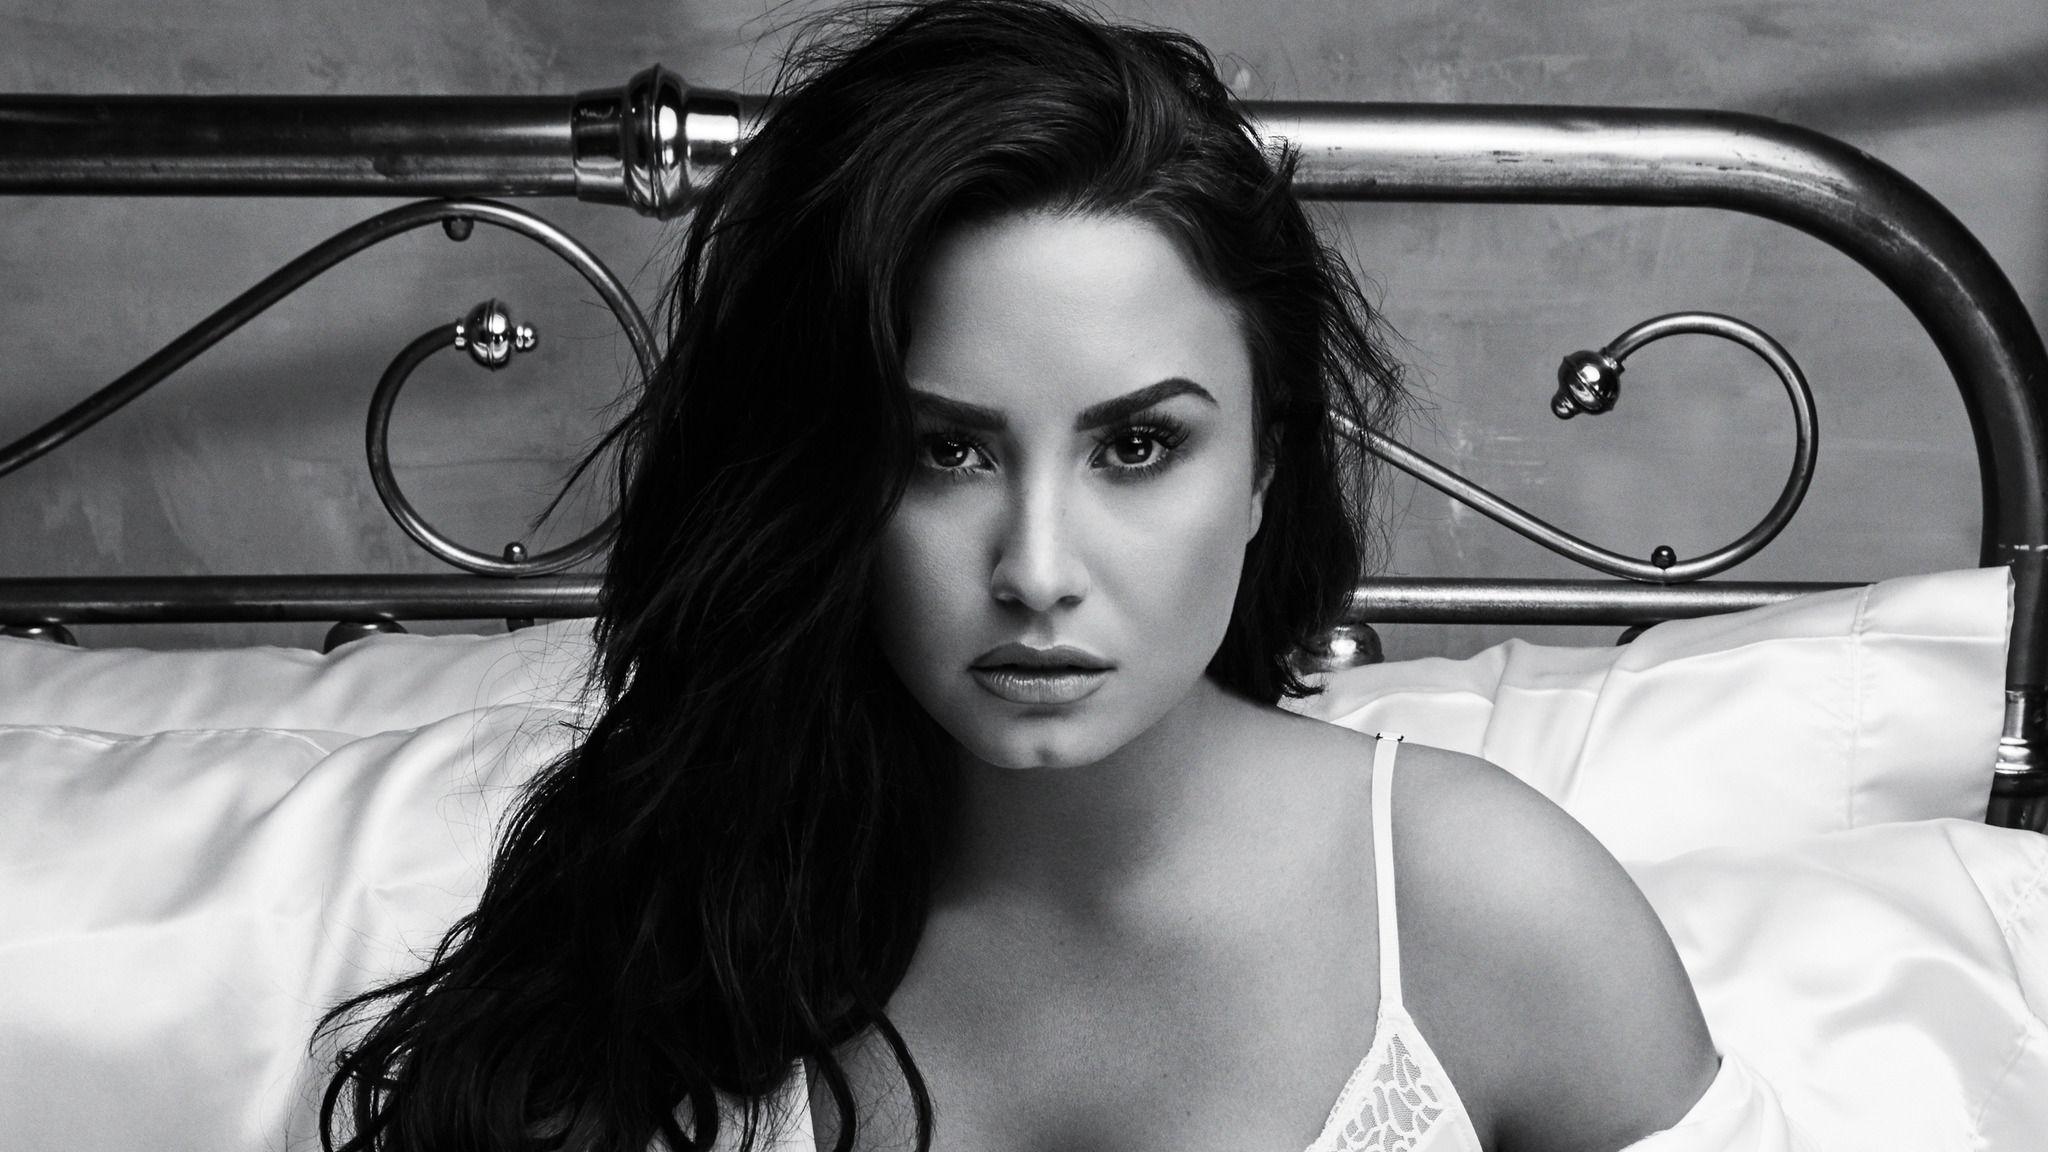 Demi Lovato Tell Me You Love Me Song Monochrome Shoot Wallpapers